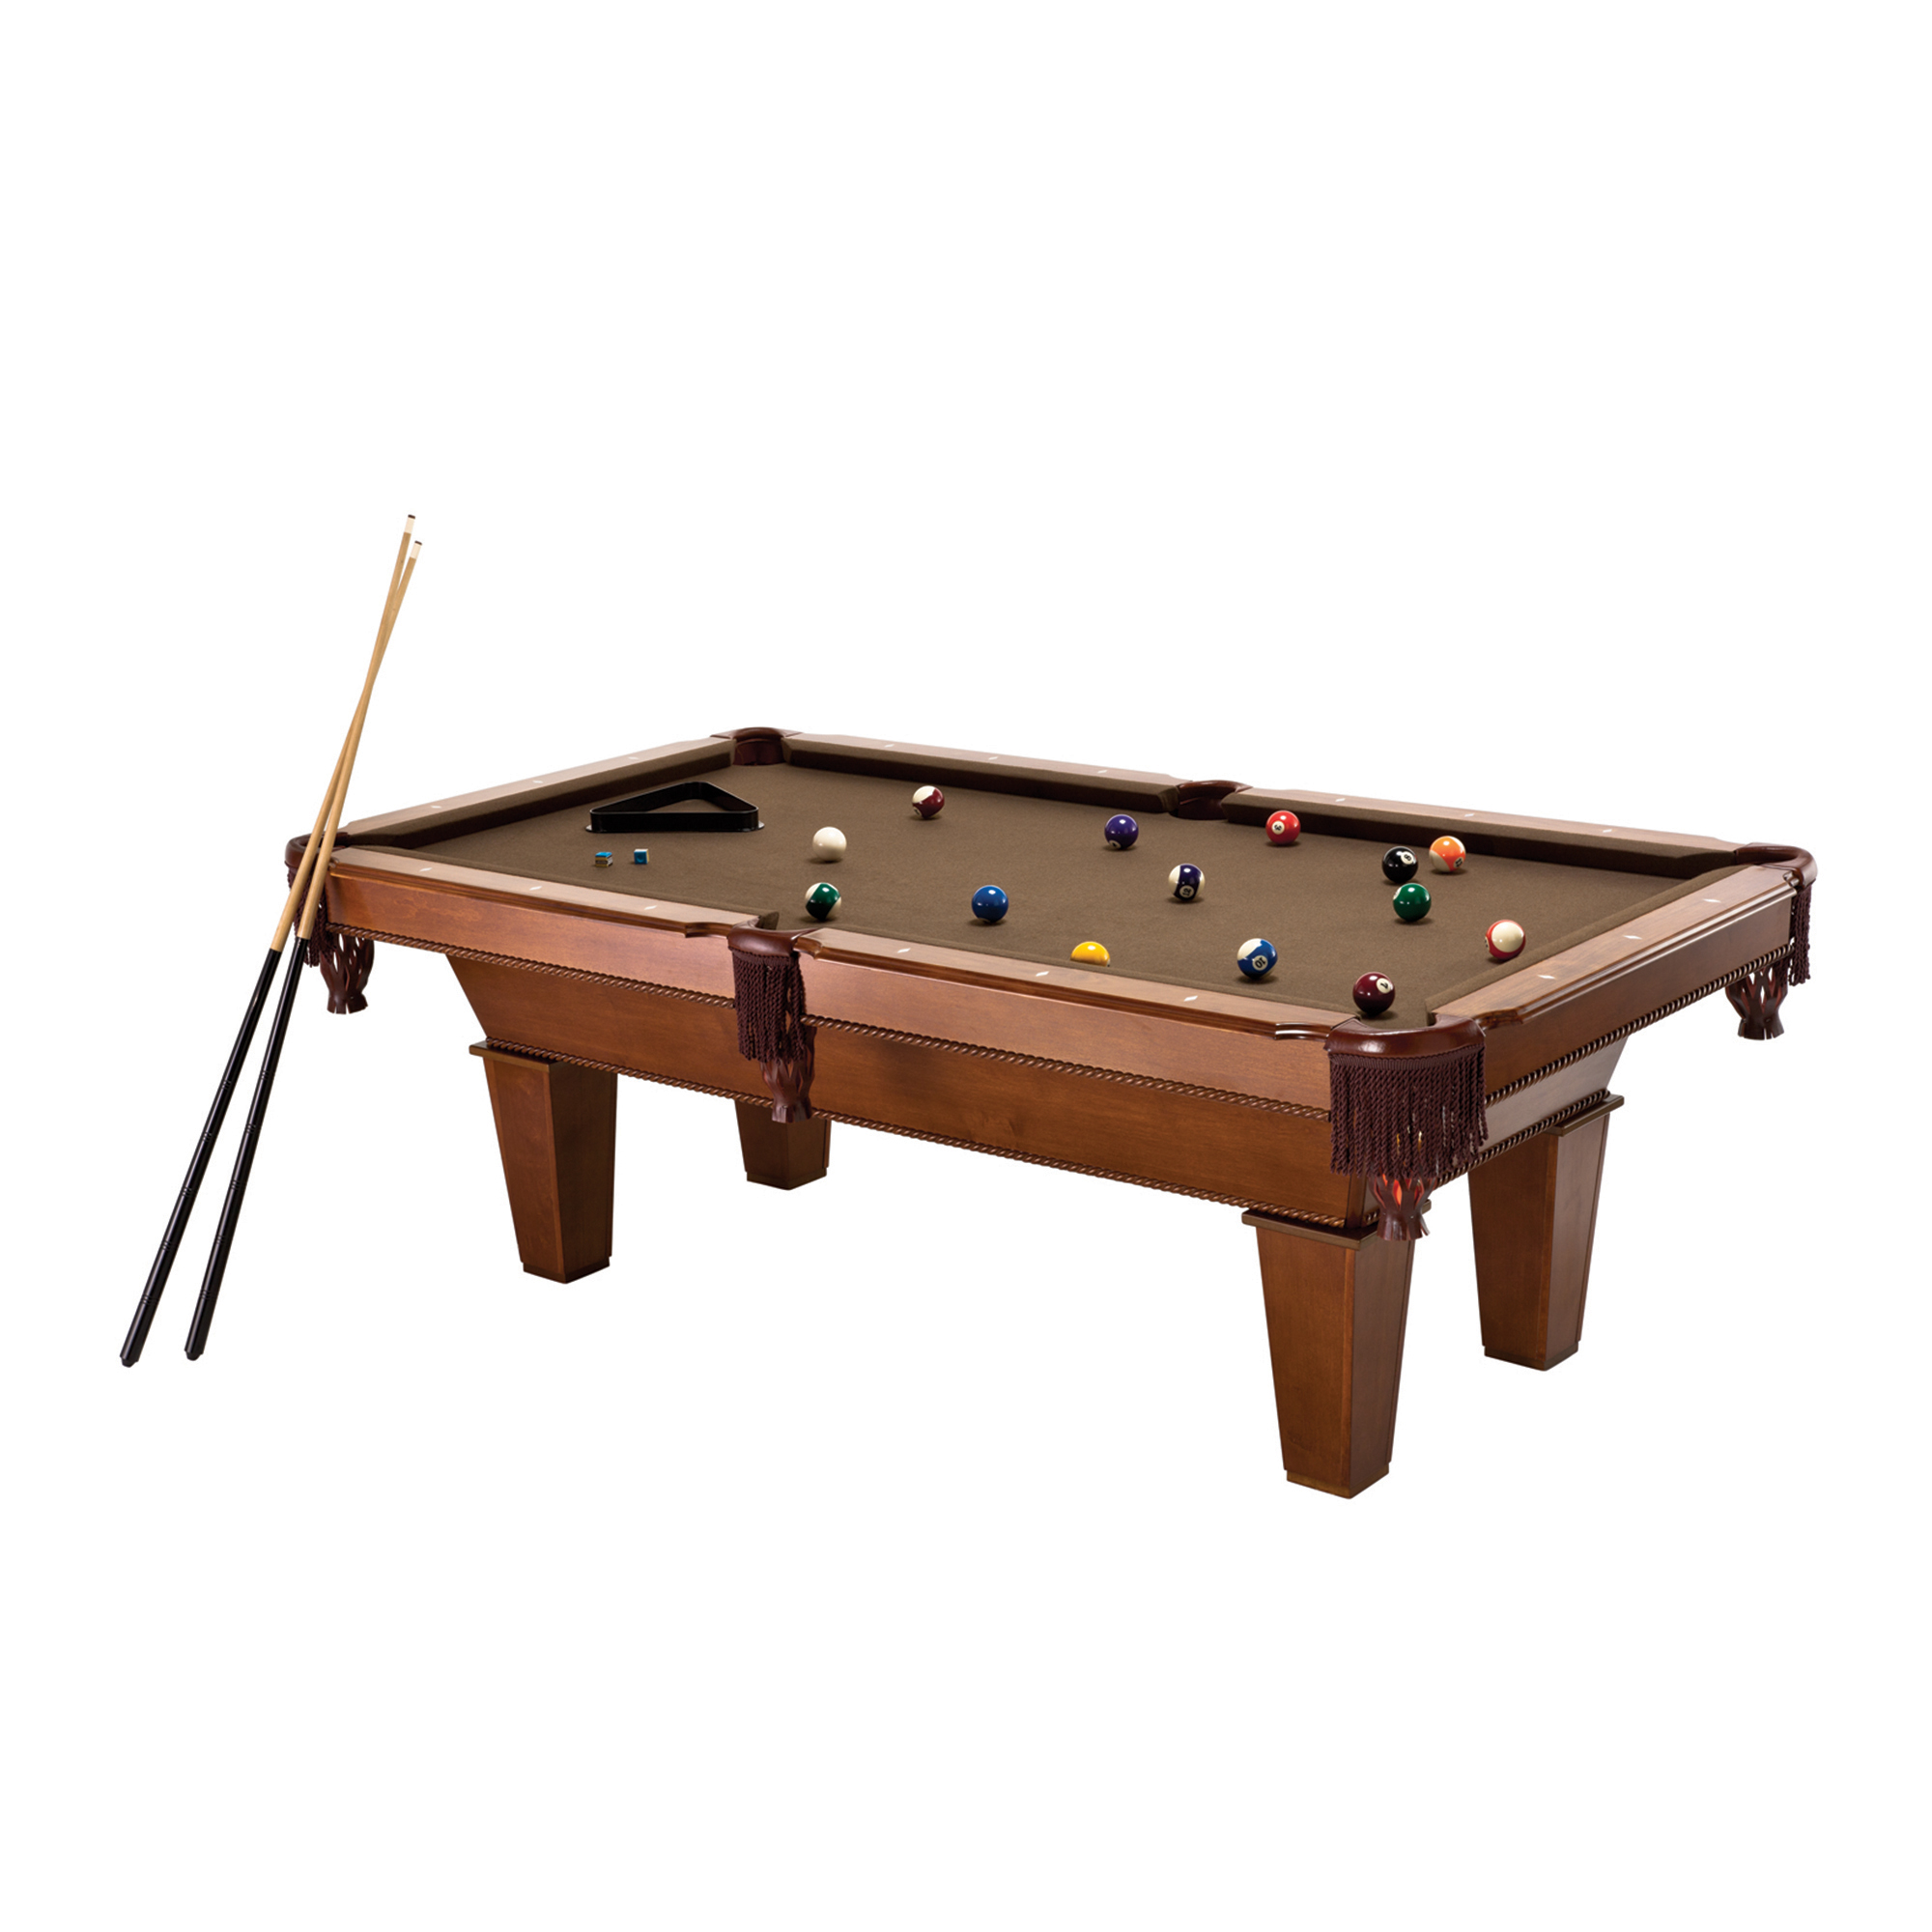 Introducing the Brilliant Billard Piece: a stylish and elegant addition to any home. This convenient piece of furniture is durable, low-priced, and ideal for entertaining guests.